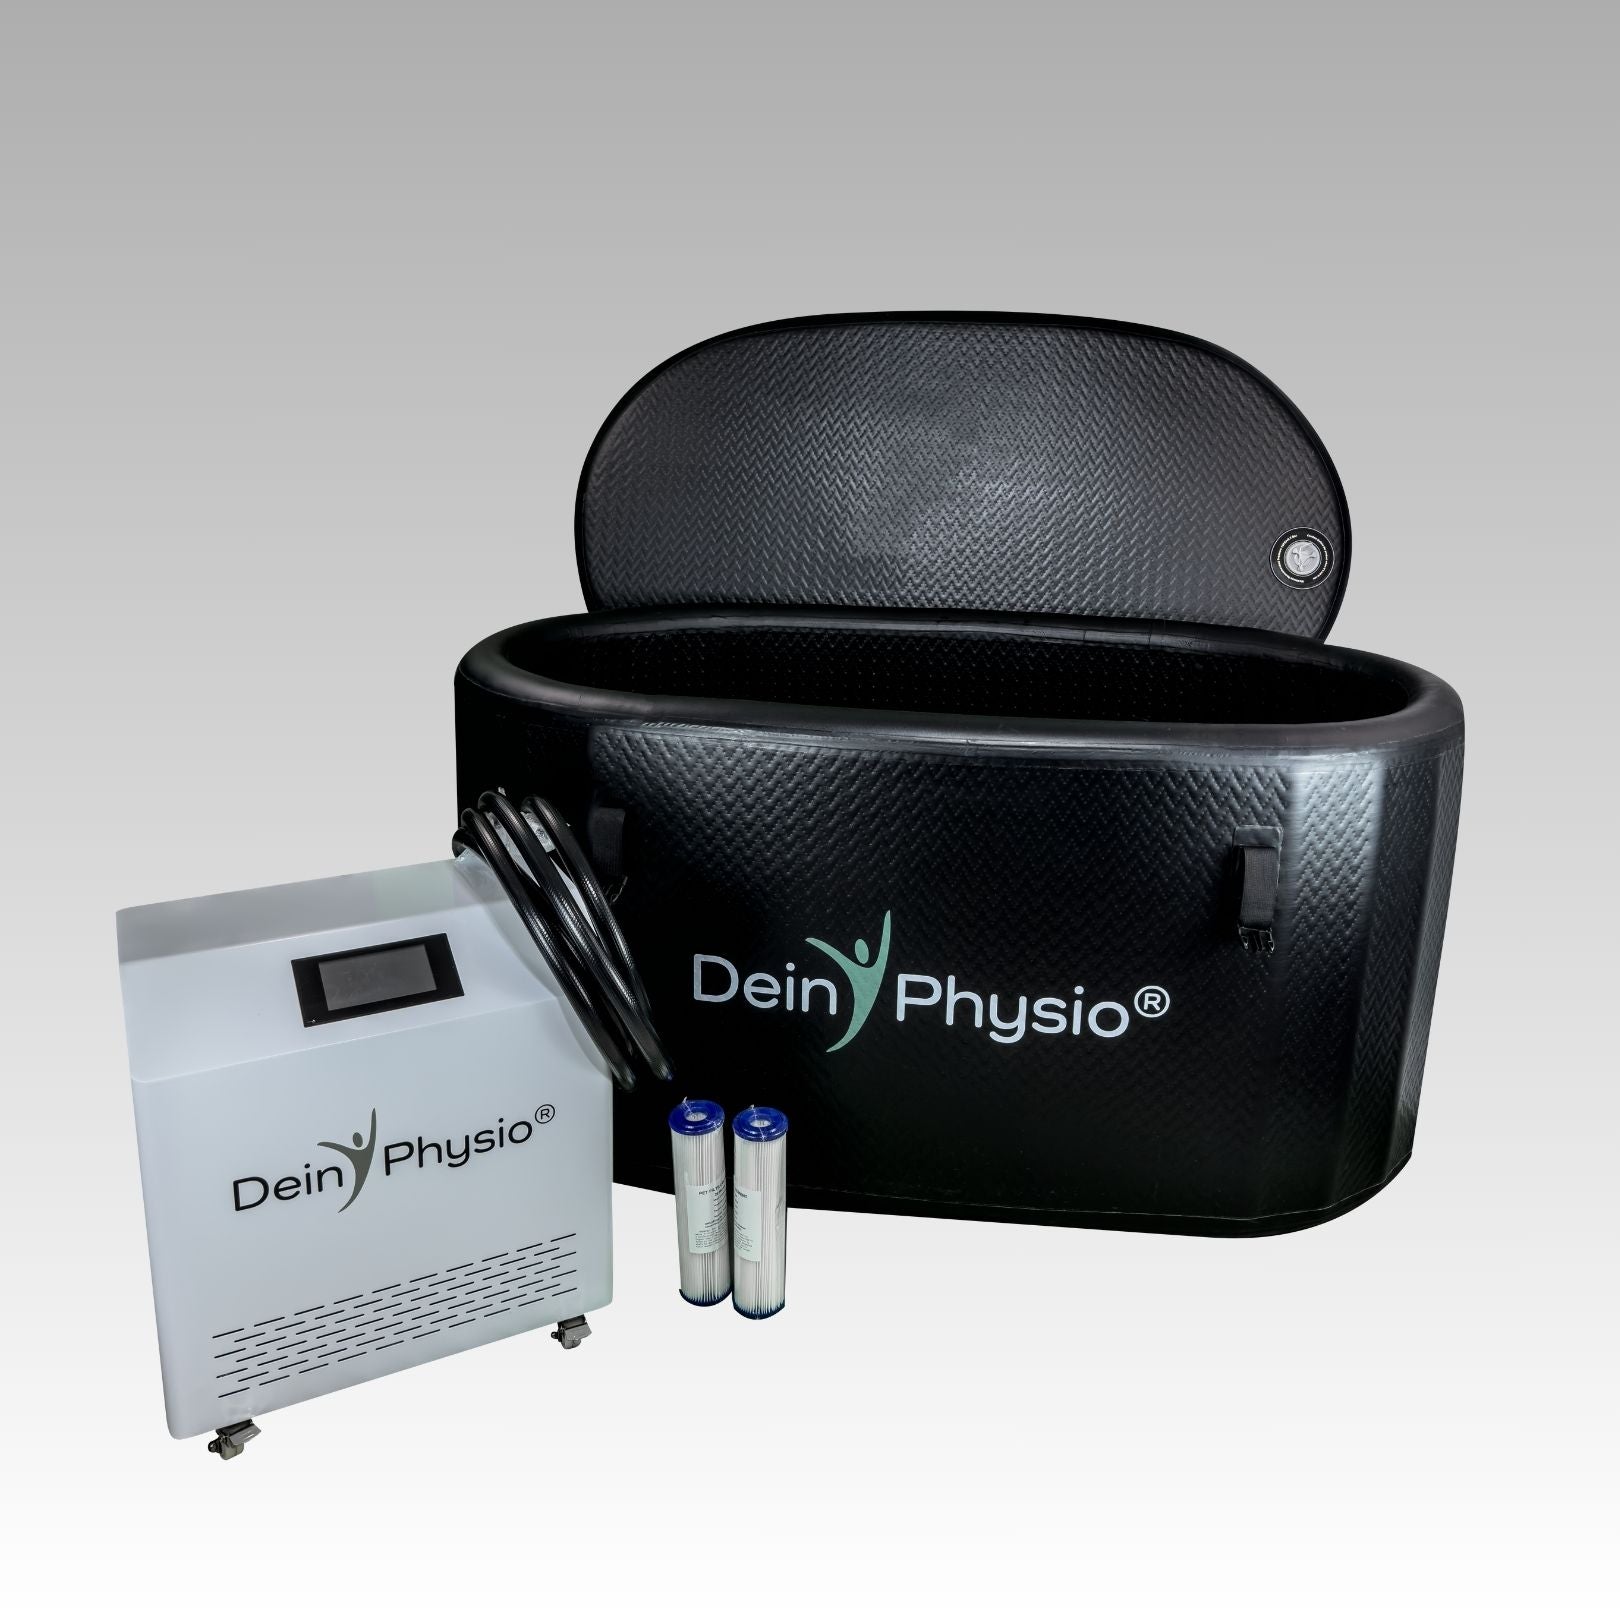 DeinPhysio® Eisbad Recovery Tub